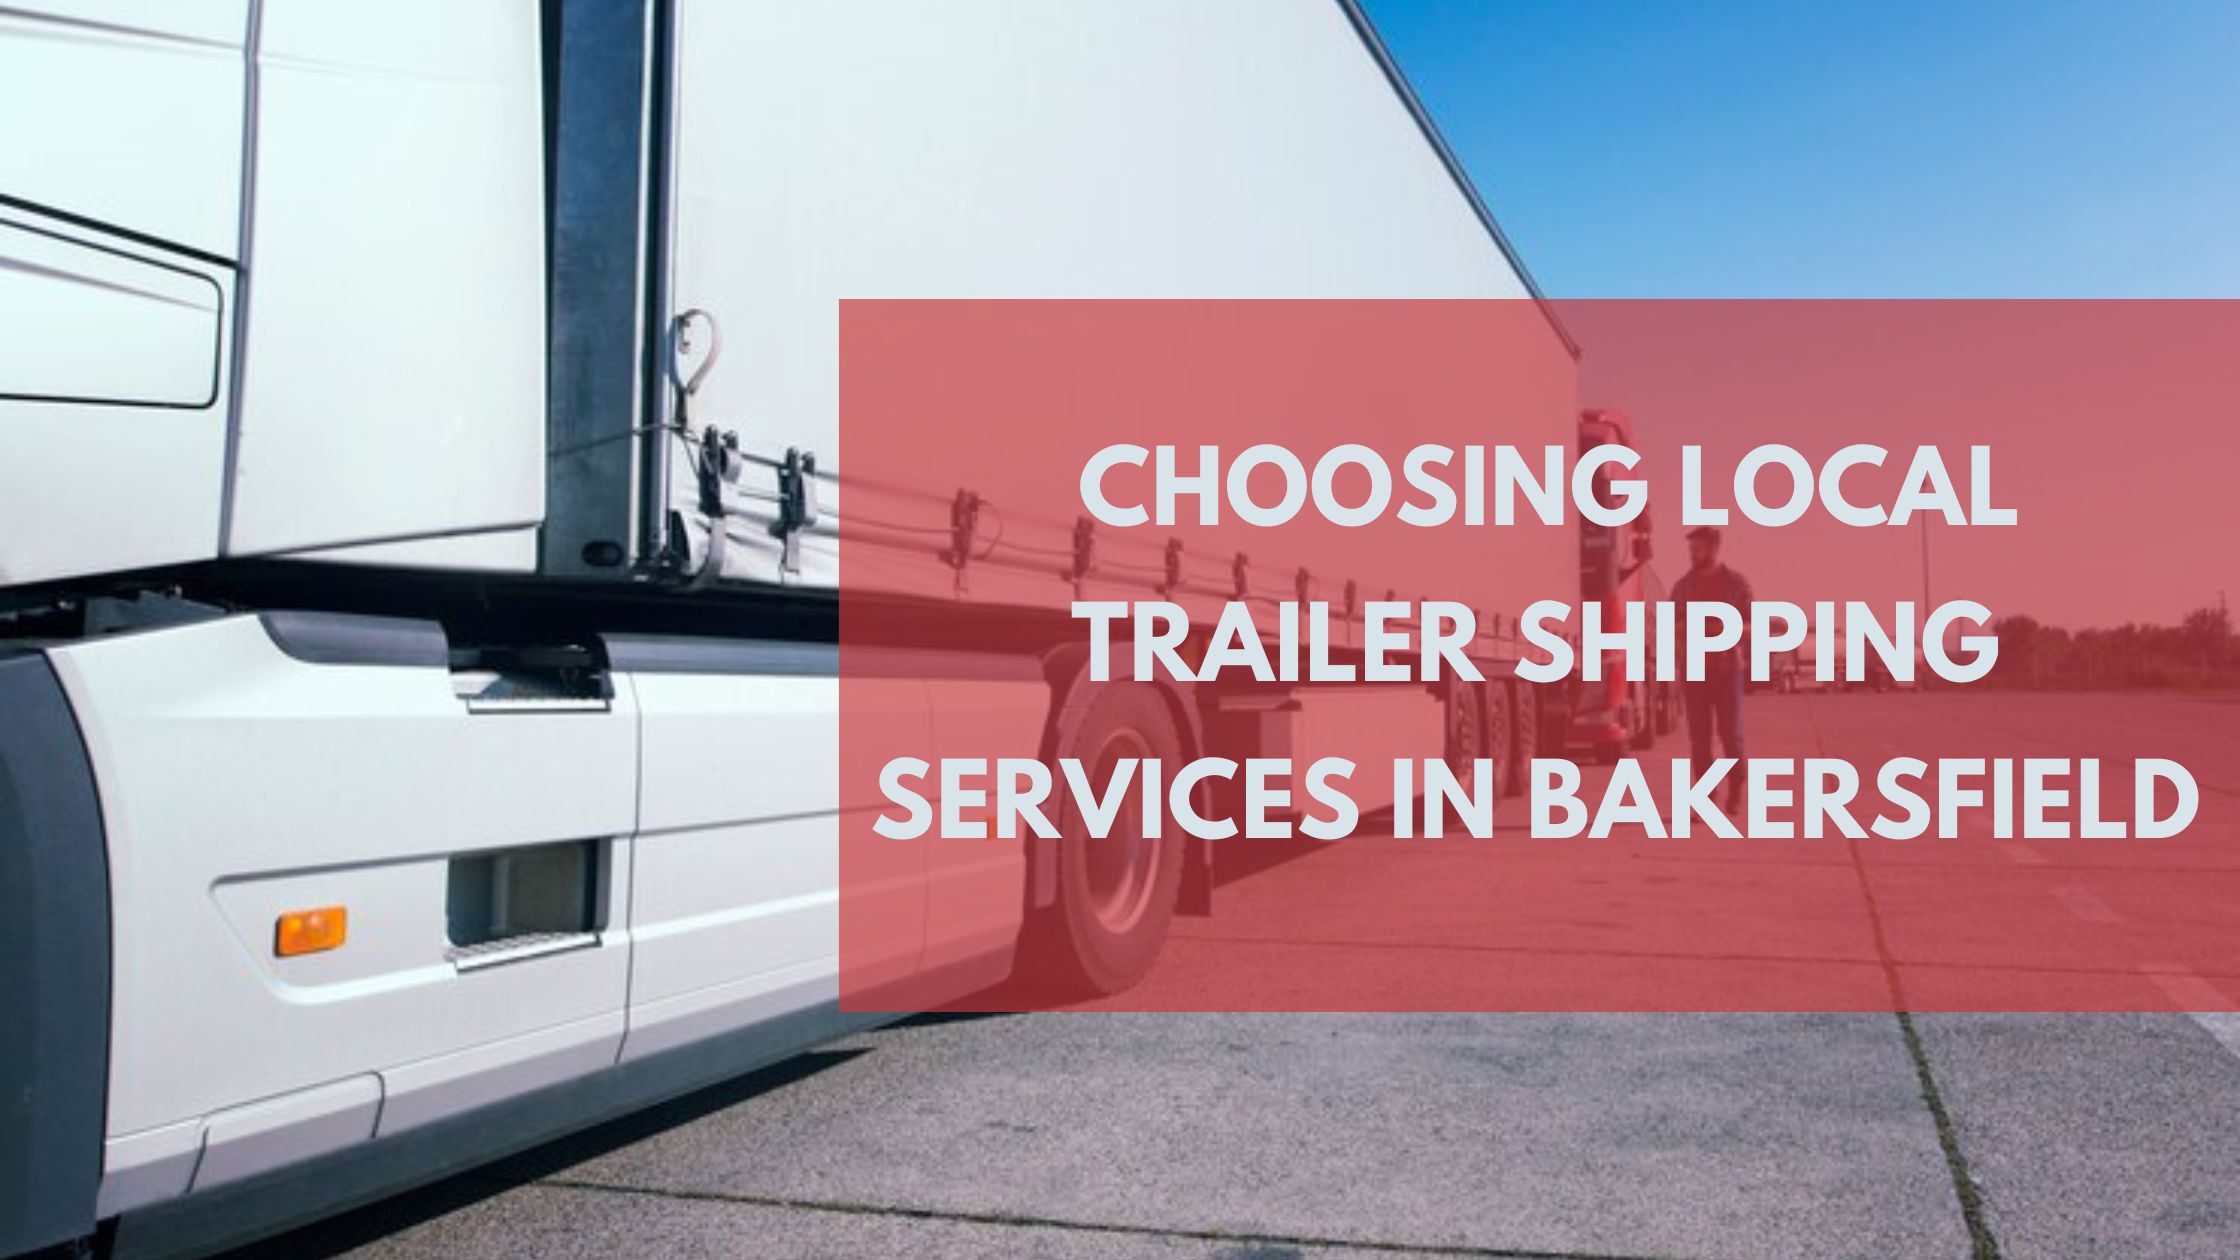 The Benefits of Choosing Local Trailer Shipping Services in Bakersfield